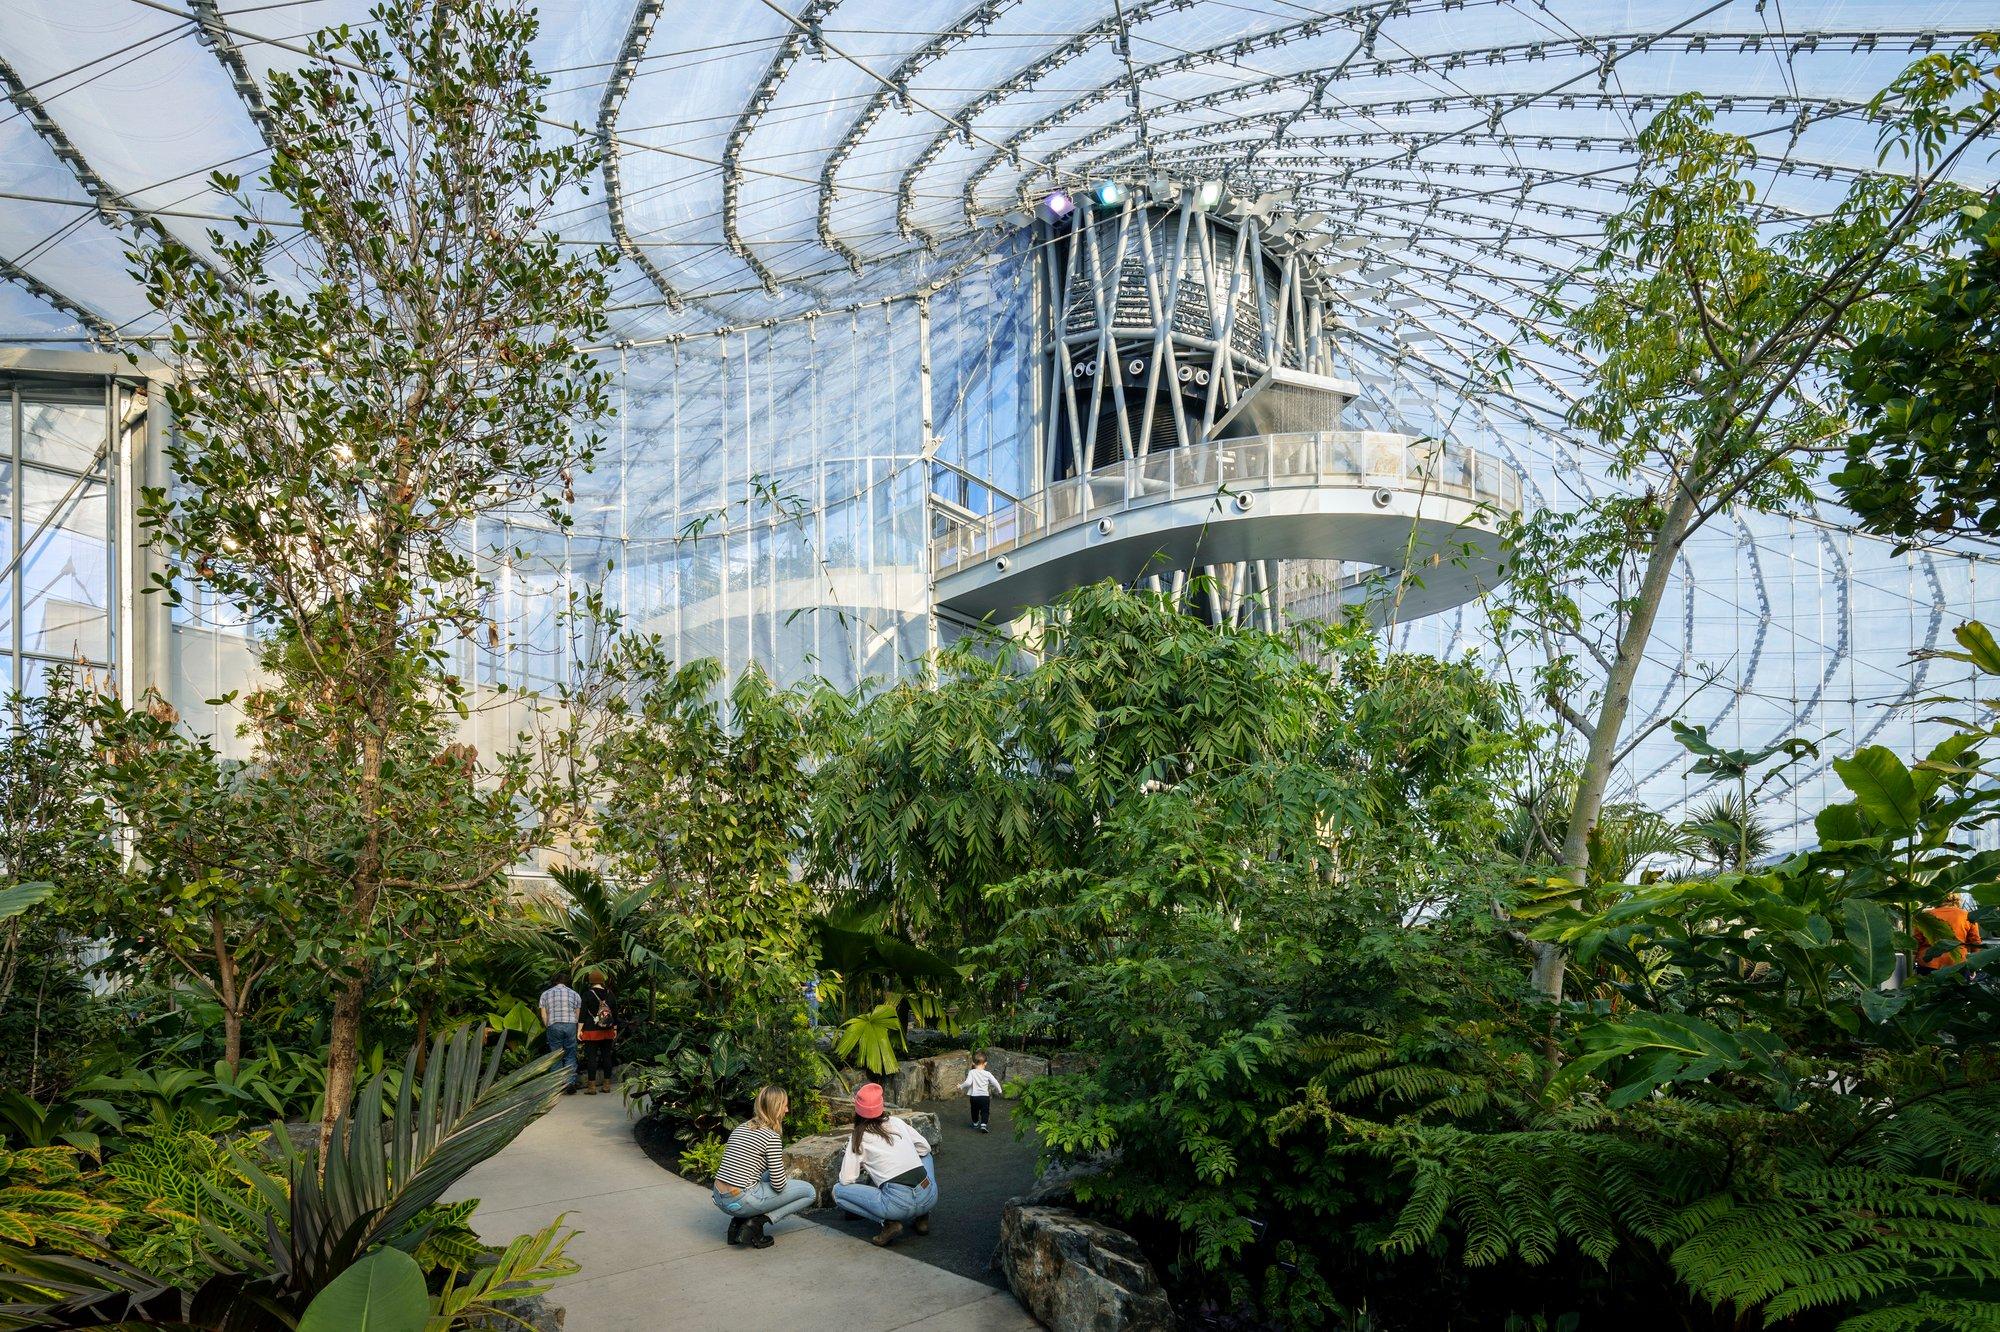 To make sure visitors (and plants) receive maximum sunlight, the architects hid a few structural necessities, like lighting, in the overhead diagrid, along with tiny fans that spritz cool water at regular intervals